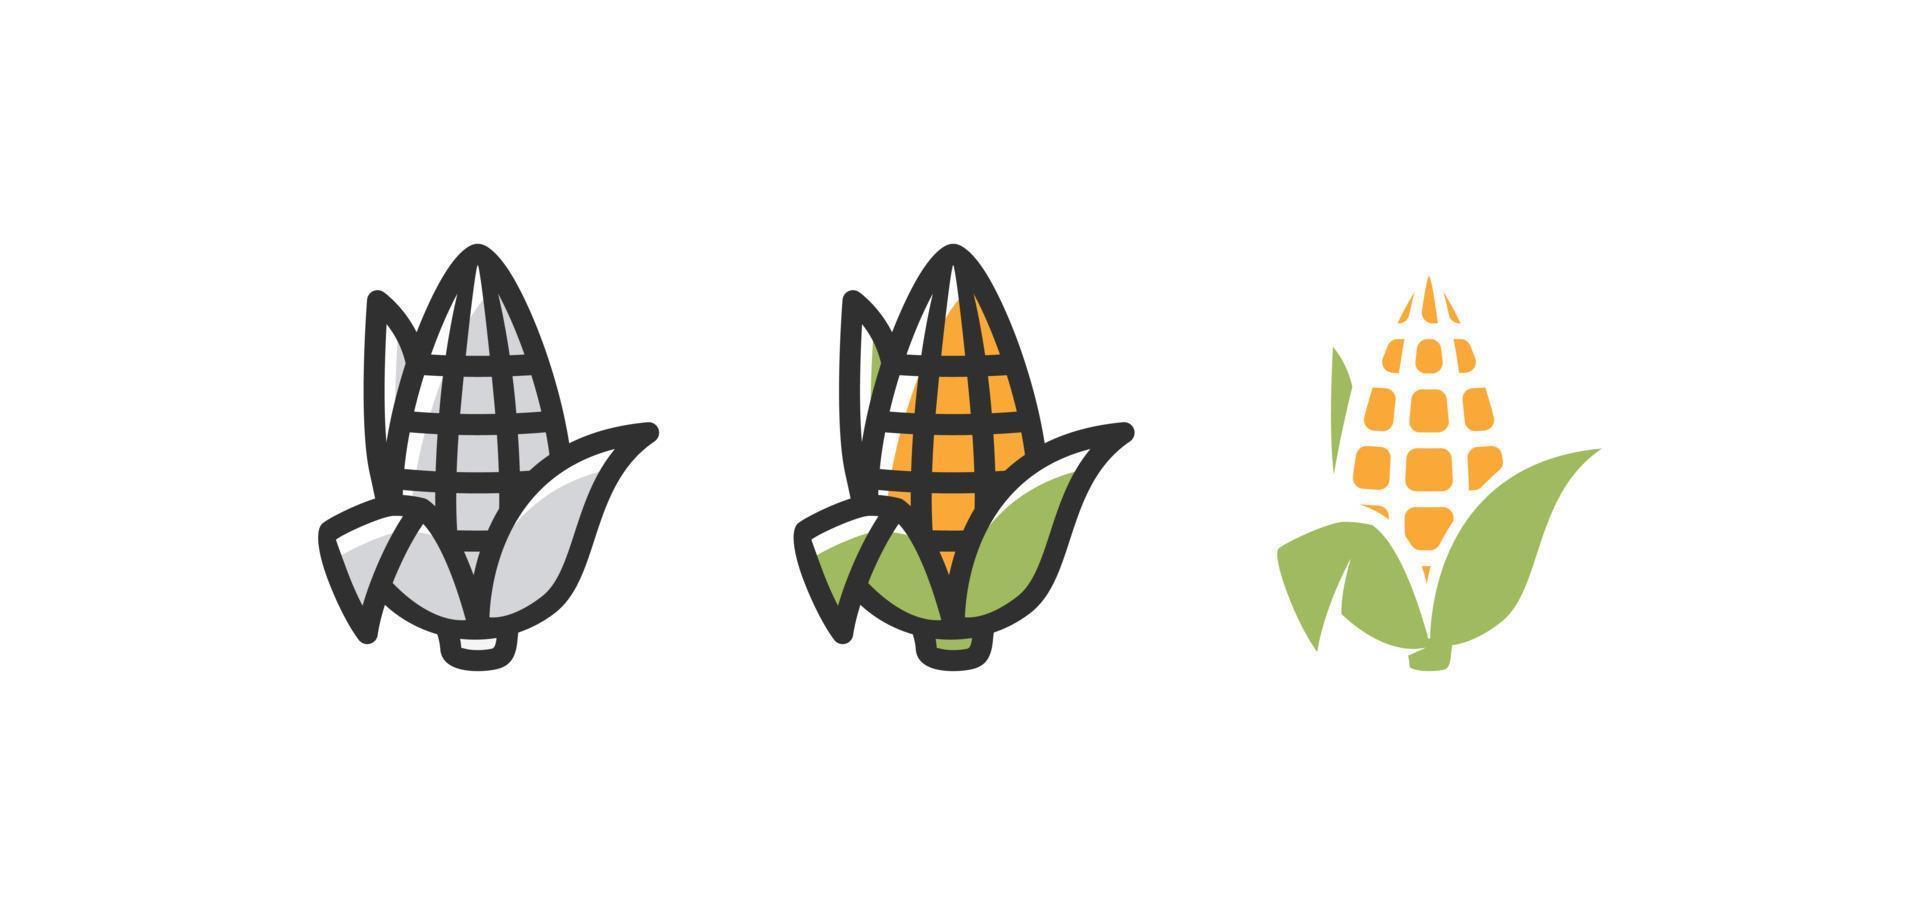 Corn design with 3 variation concept vector